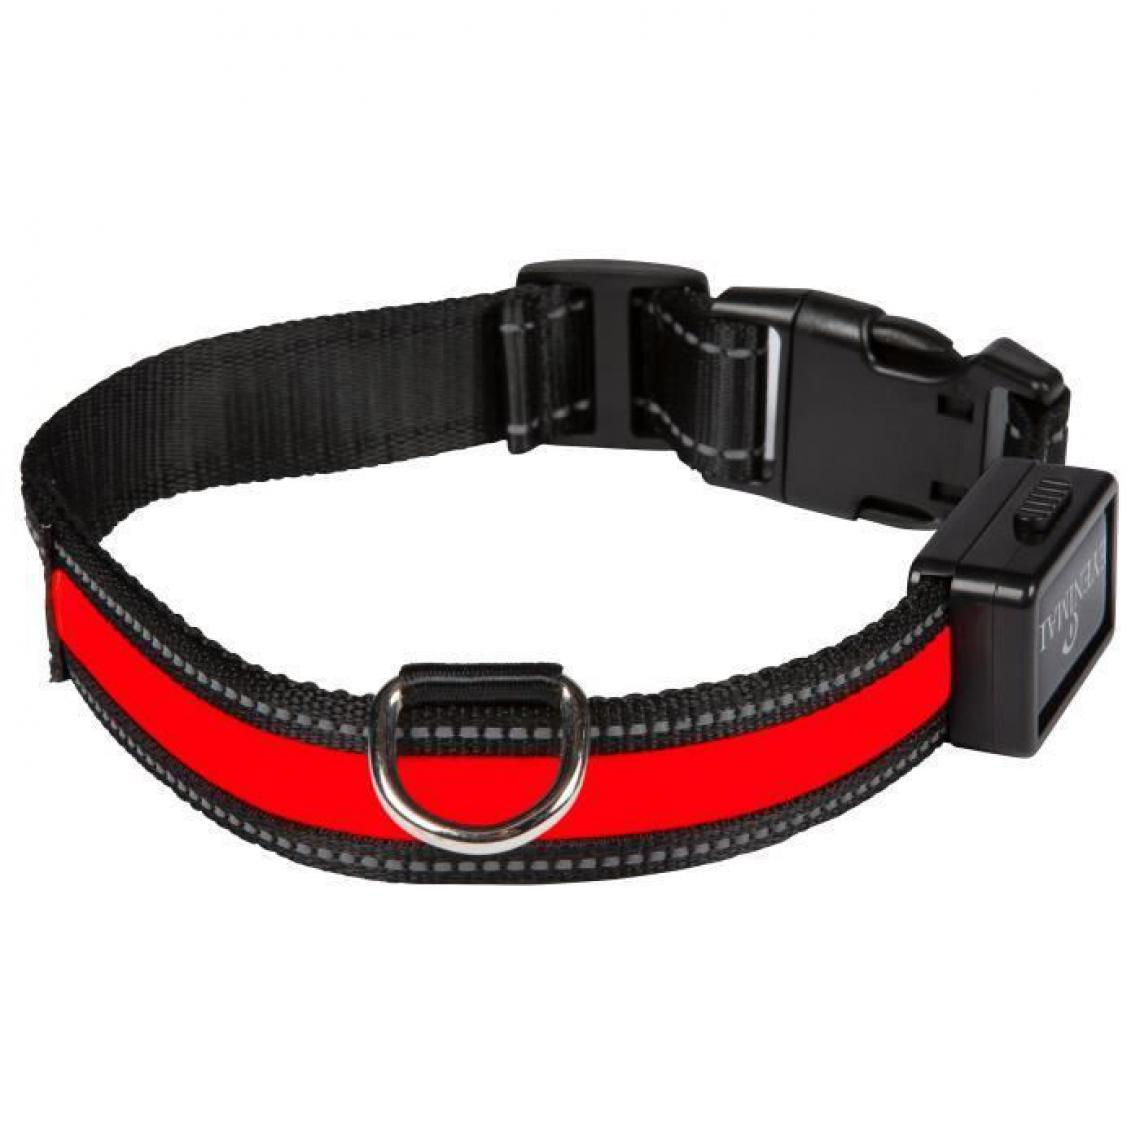 Eyenimal - EYENIMAL Collier lumineux Light Collar USB rechargeable S - Rouge - Pour chien - Collier pour chien